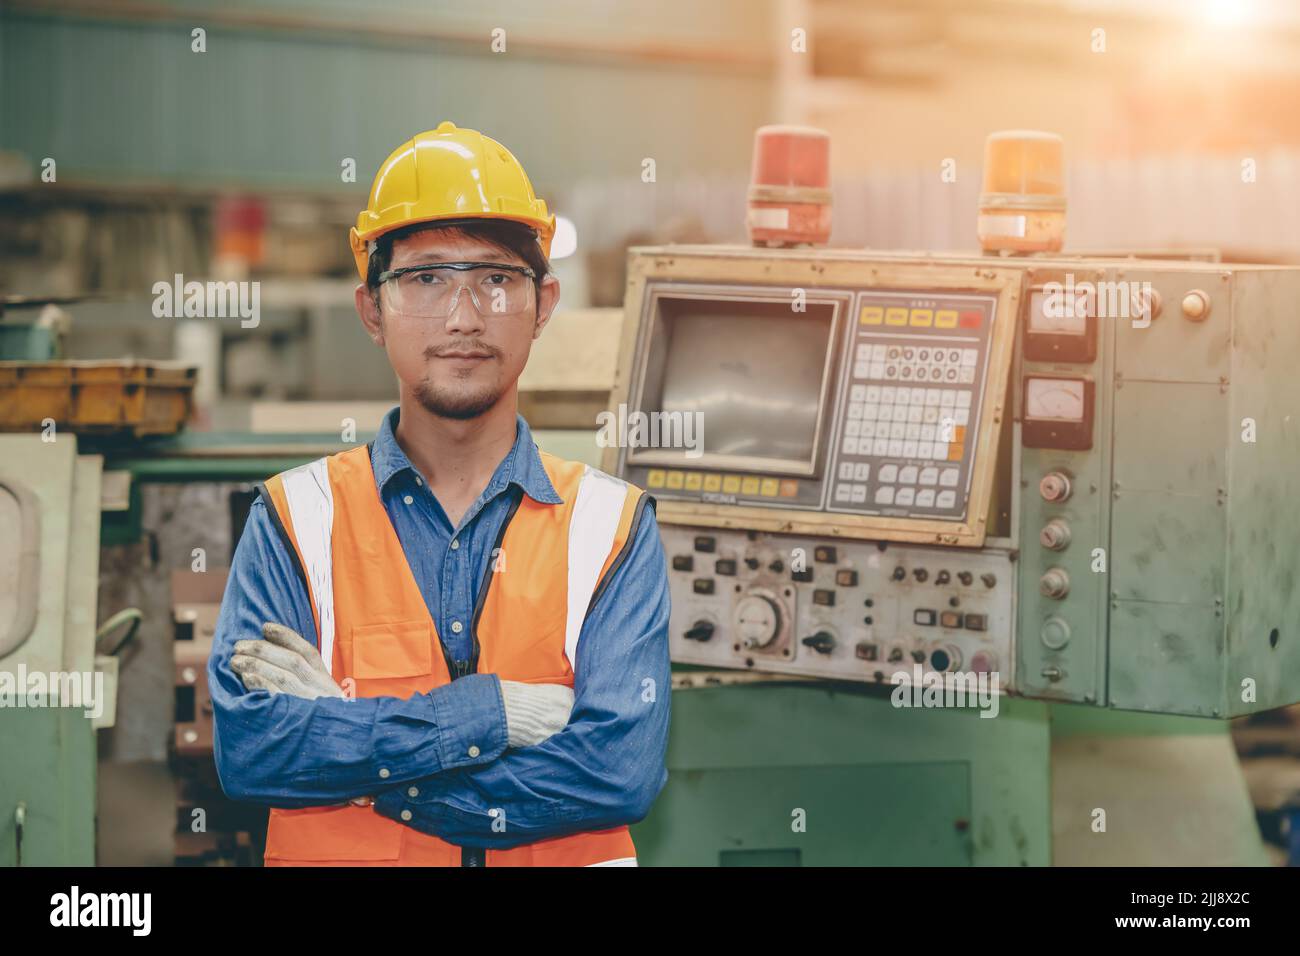 Steel factory staff worker portrait Asian man work in a heavy industrial machine with safety engineer uniform. Stock Photo